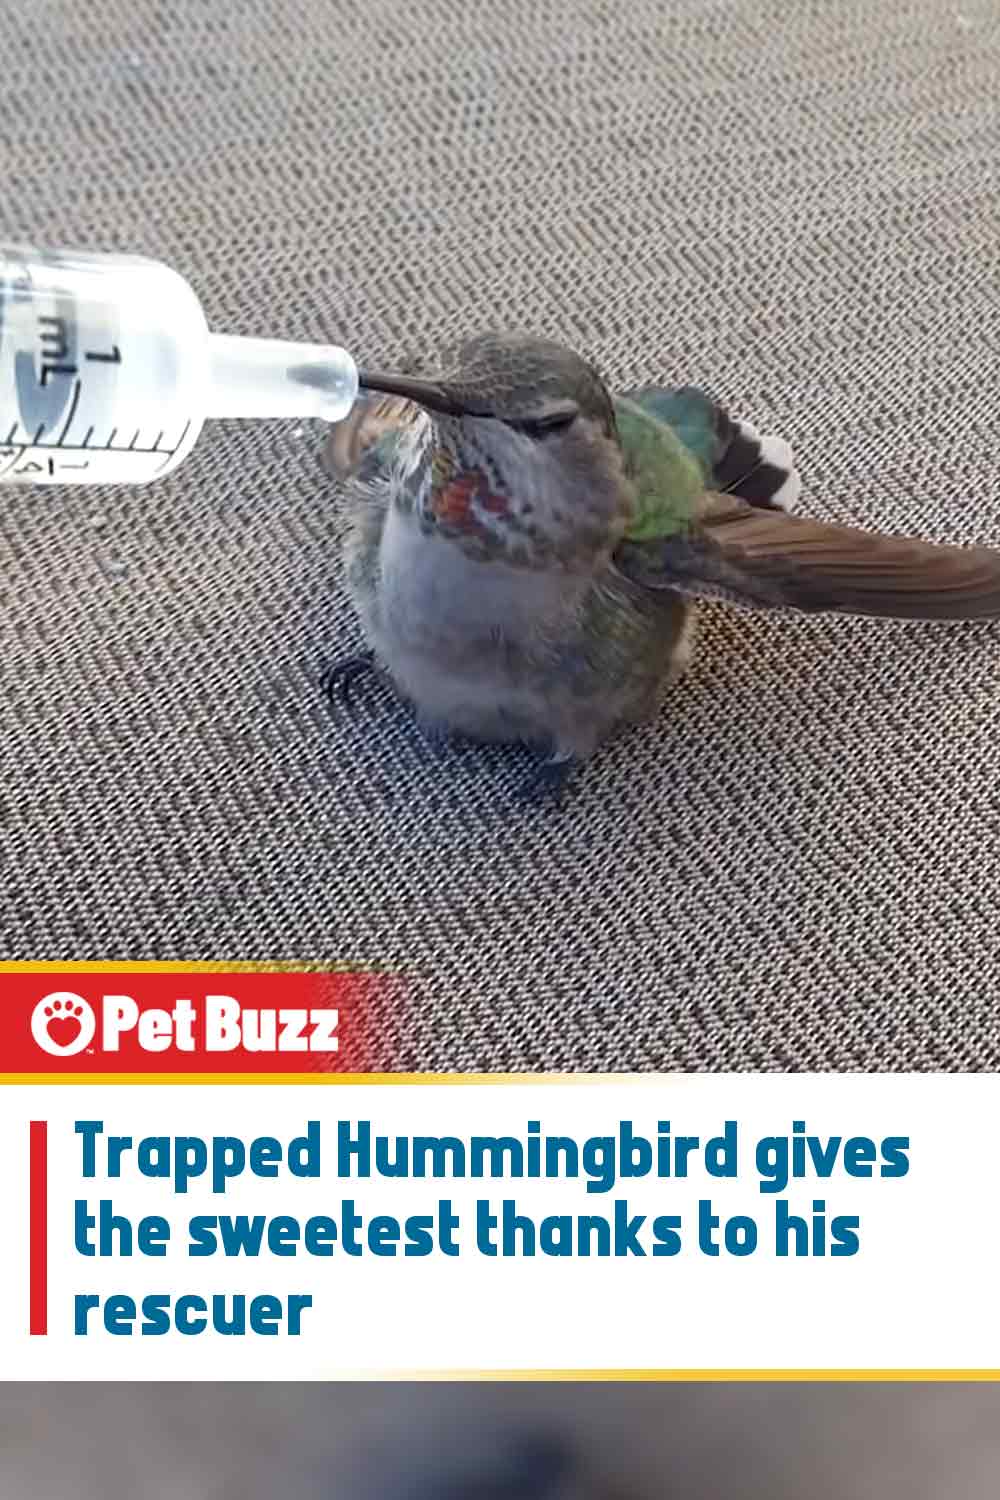 Trapped Hummingbird gives the sweetest thanks to his rescuer